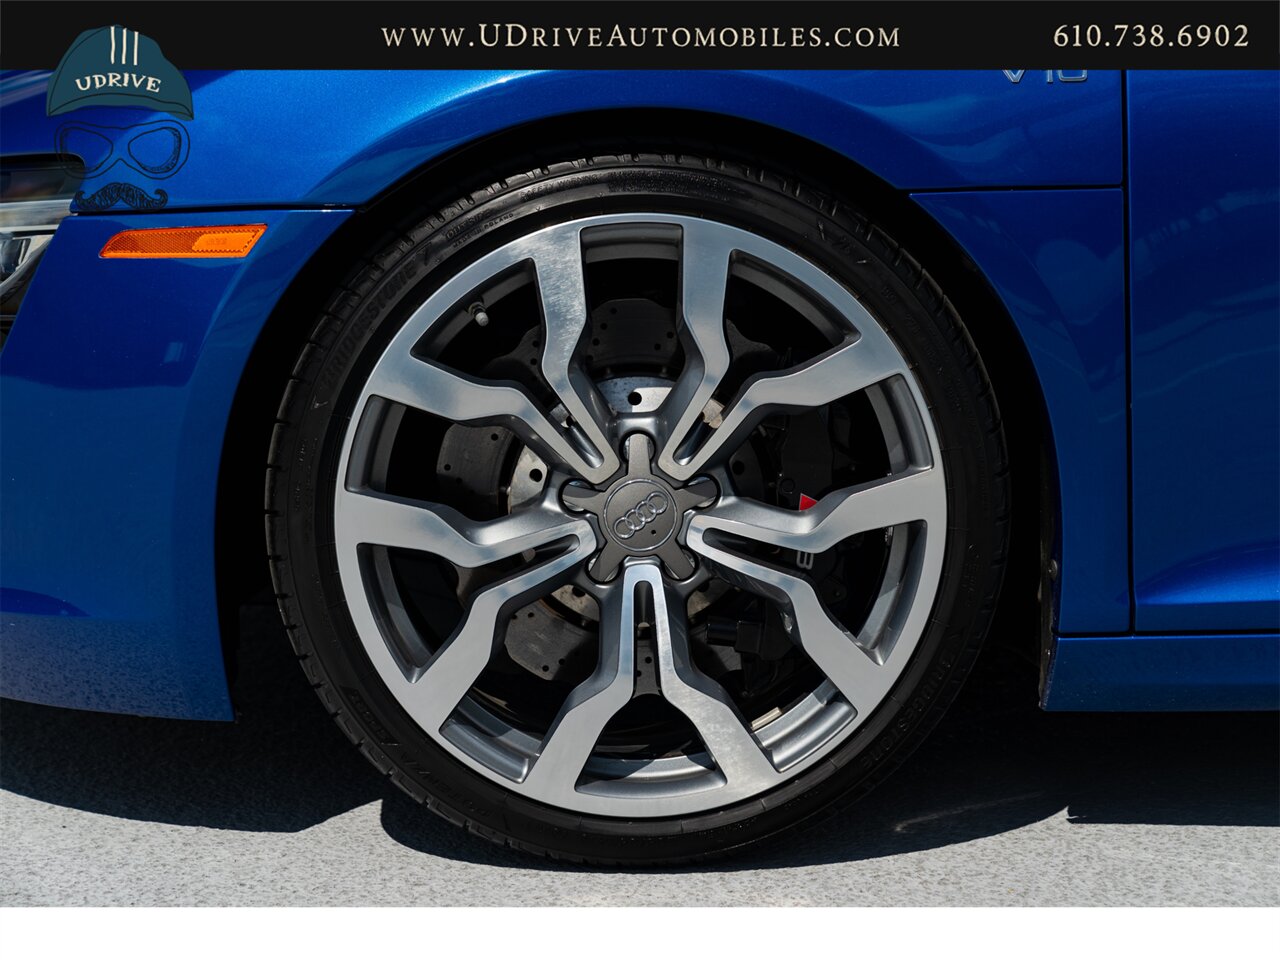 2015 Audi R8 5.2 V10 Quattro 6 Speed Manual 10k Miles  Diamond Stitched Leather 1 of 2 - Photo 52 - West Chester, PA 19382